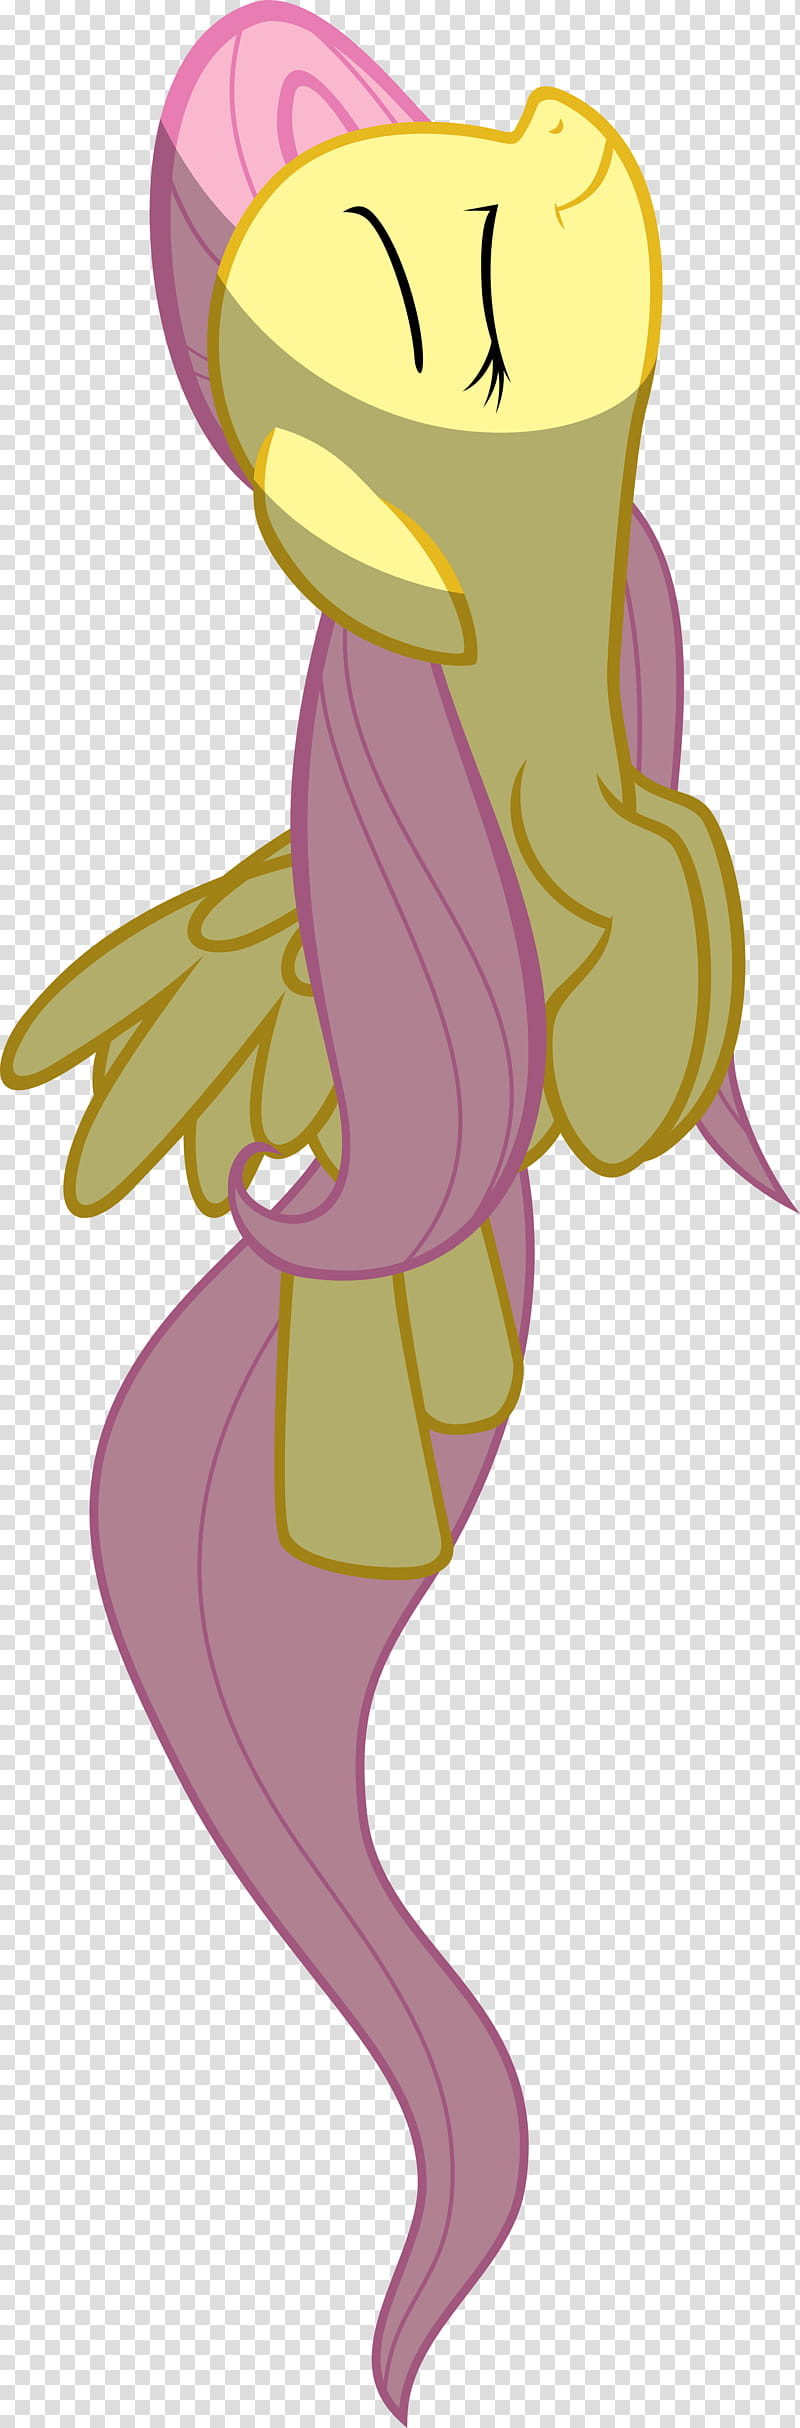 Fluttershy Ascending, yellow and pink pony art transparent background PNG clipart